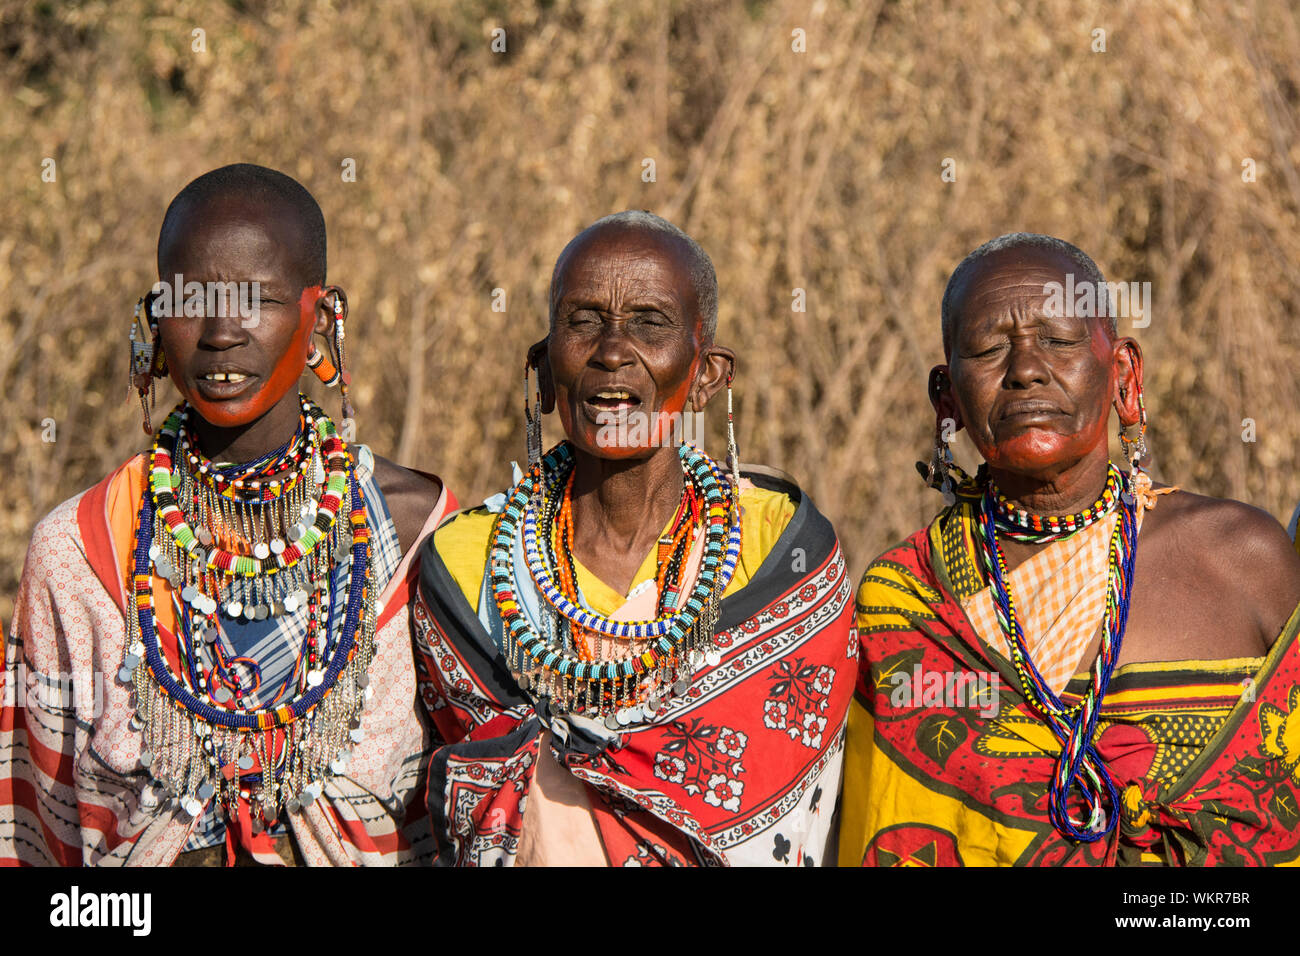 Three Maasai Women wearing traditional kangas and jewelry, necklaces, earrings singing in a village near the Masai Mara, Kenya, East Africa Stock Photo